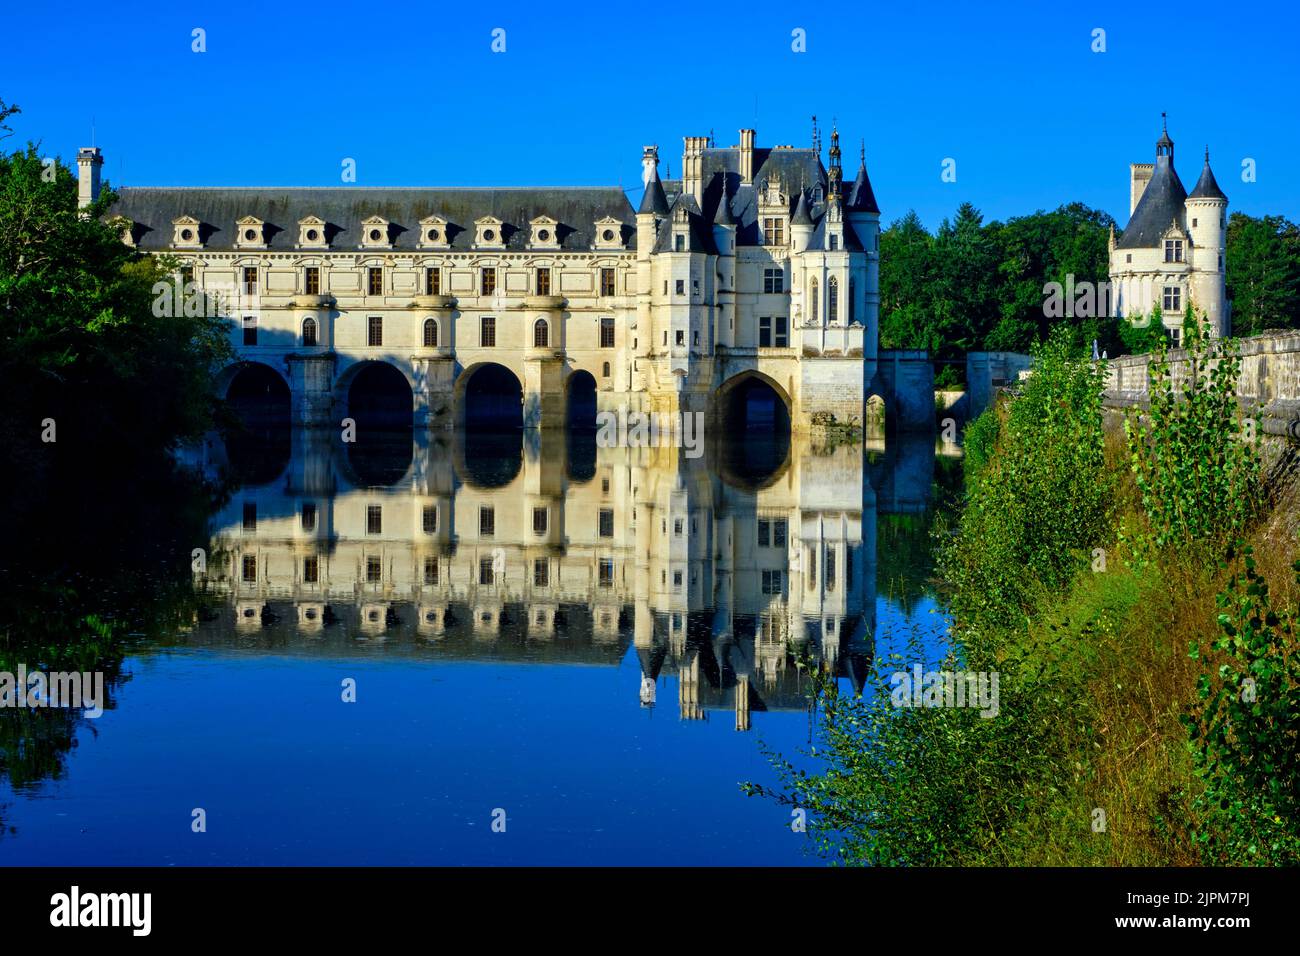 France, Indre et Loire, Chenonceaux, Château de Chenonceau listed as World Heritage by UNESCO, built from 1513 to 1521 in Renaissance style Stock Photo